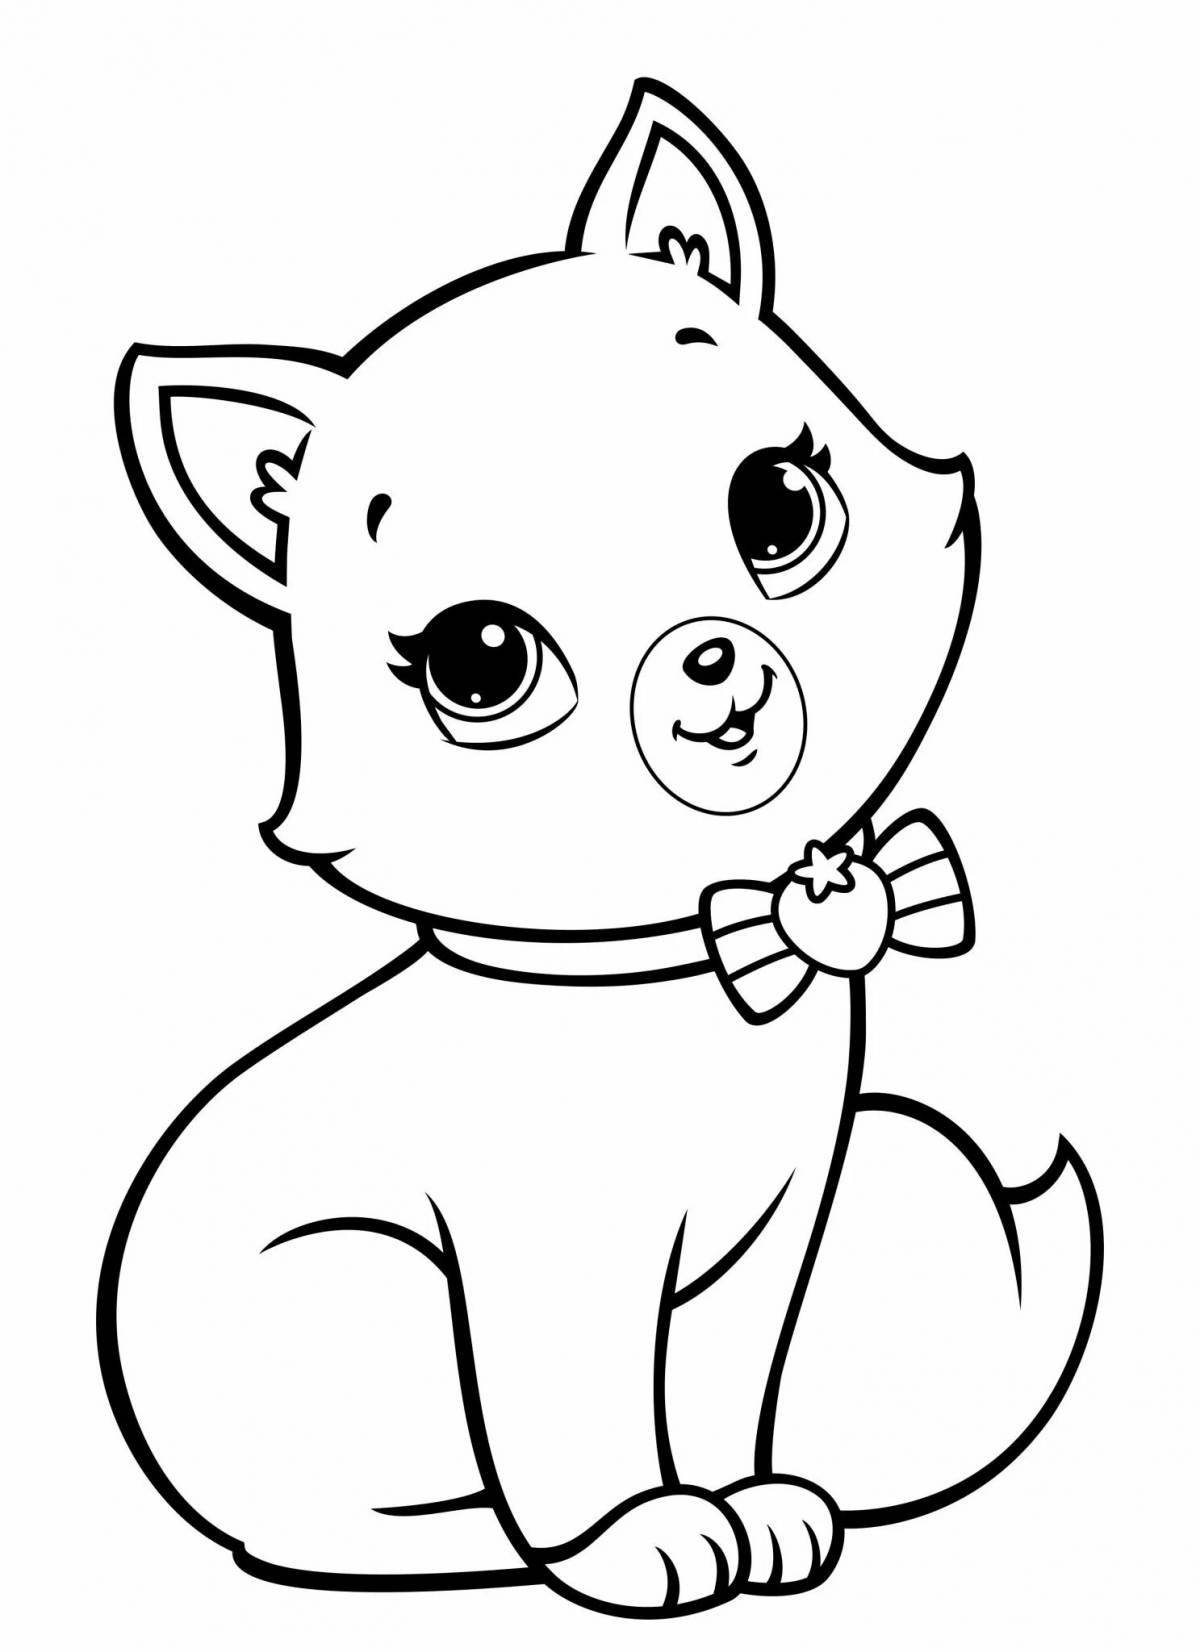 Bubble cat and dog coloring book